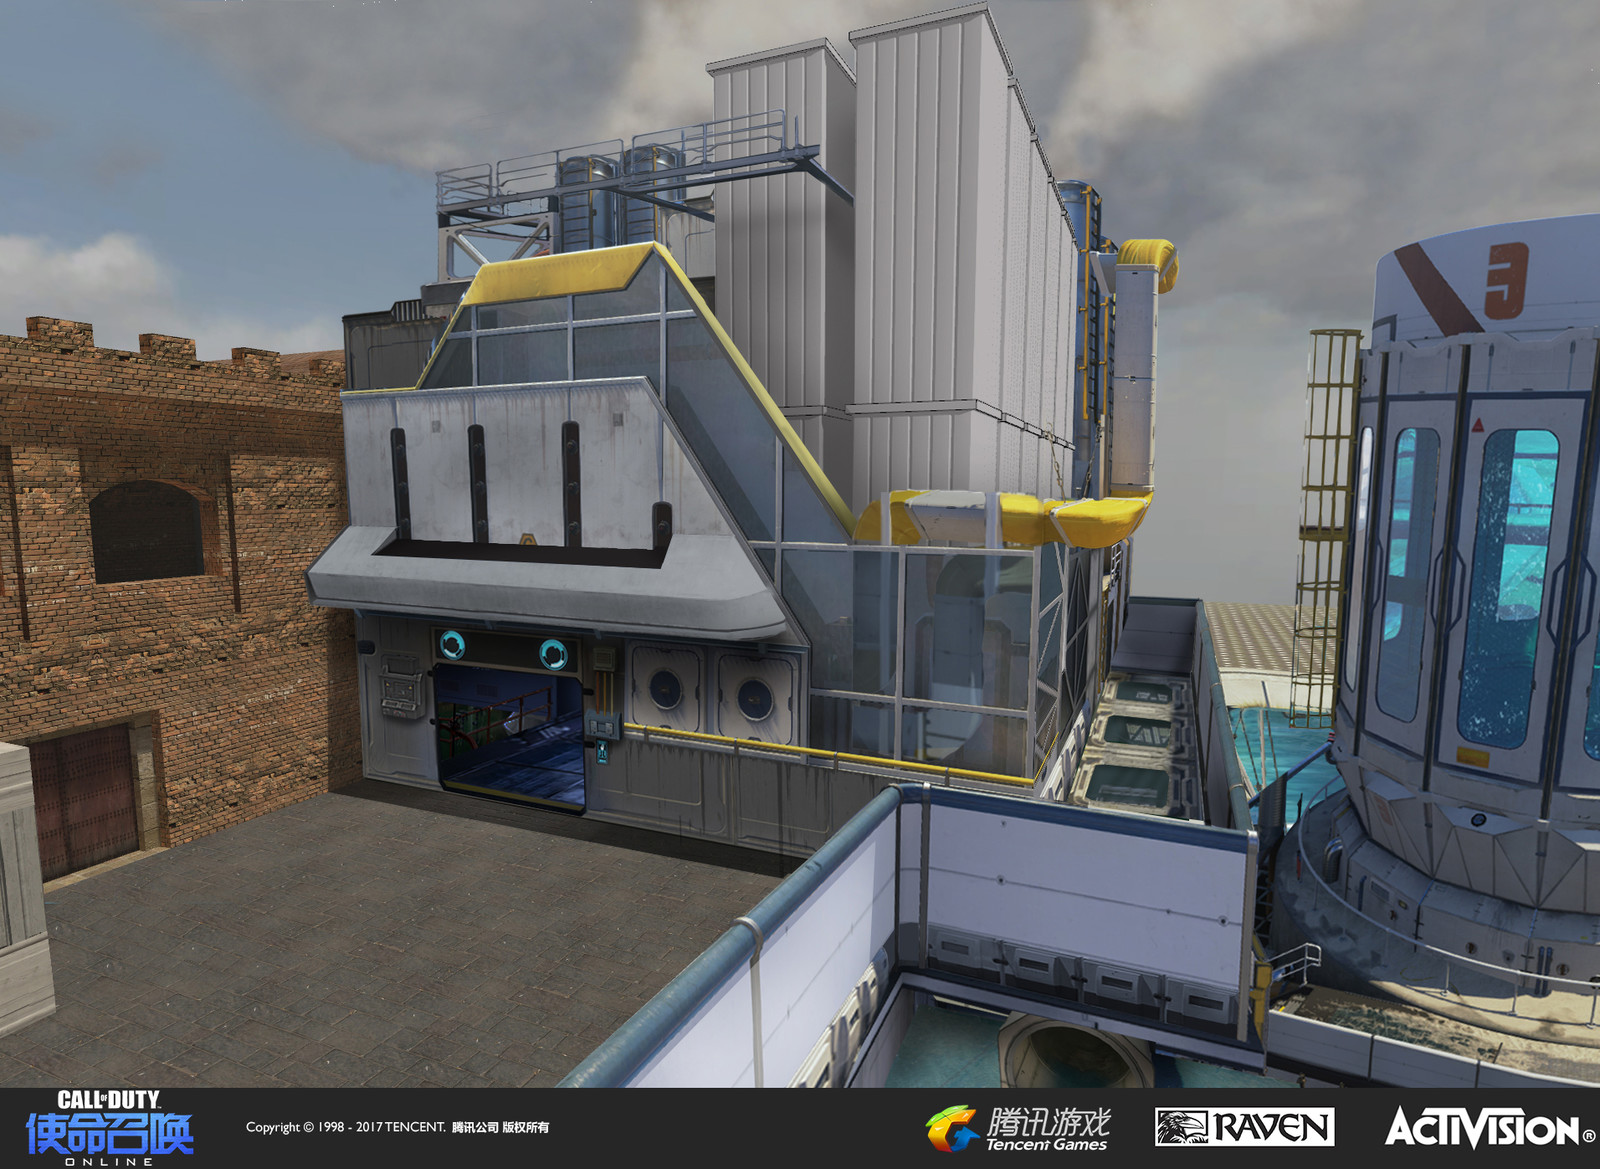 Concept art I created using photoshop of a water filtration plant. The design aesthetic was influenced by elements of the map "Solar" from Call of Duty: Advanced Warfare